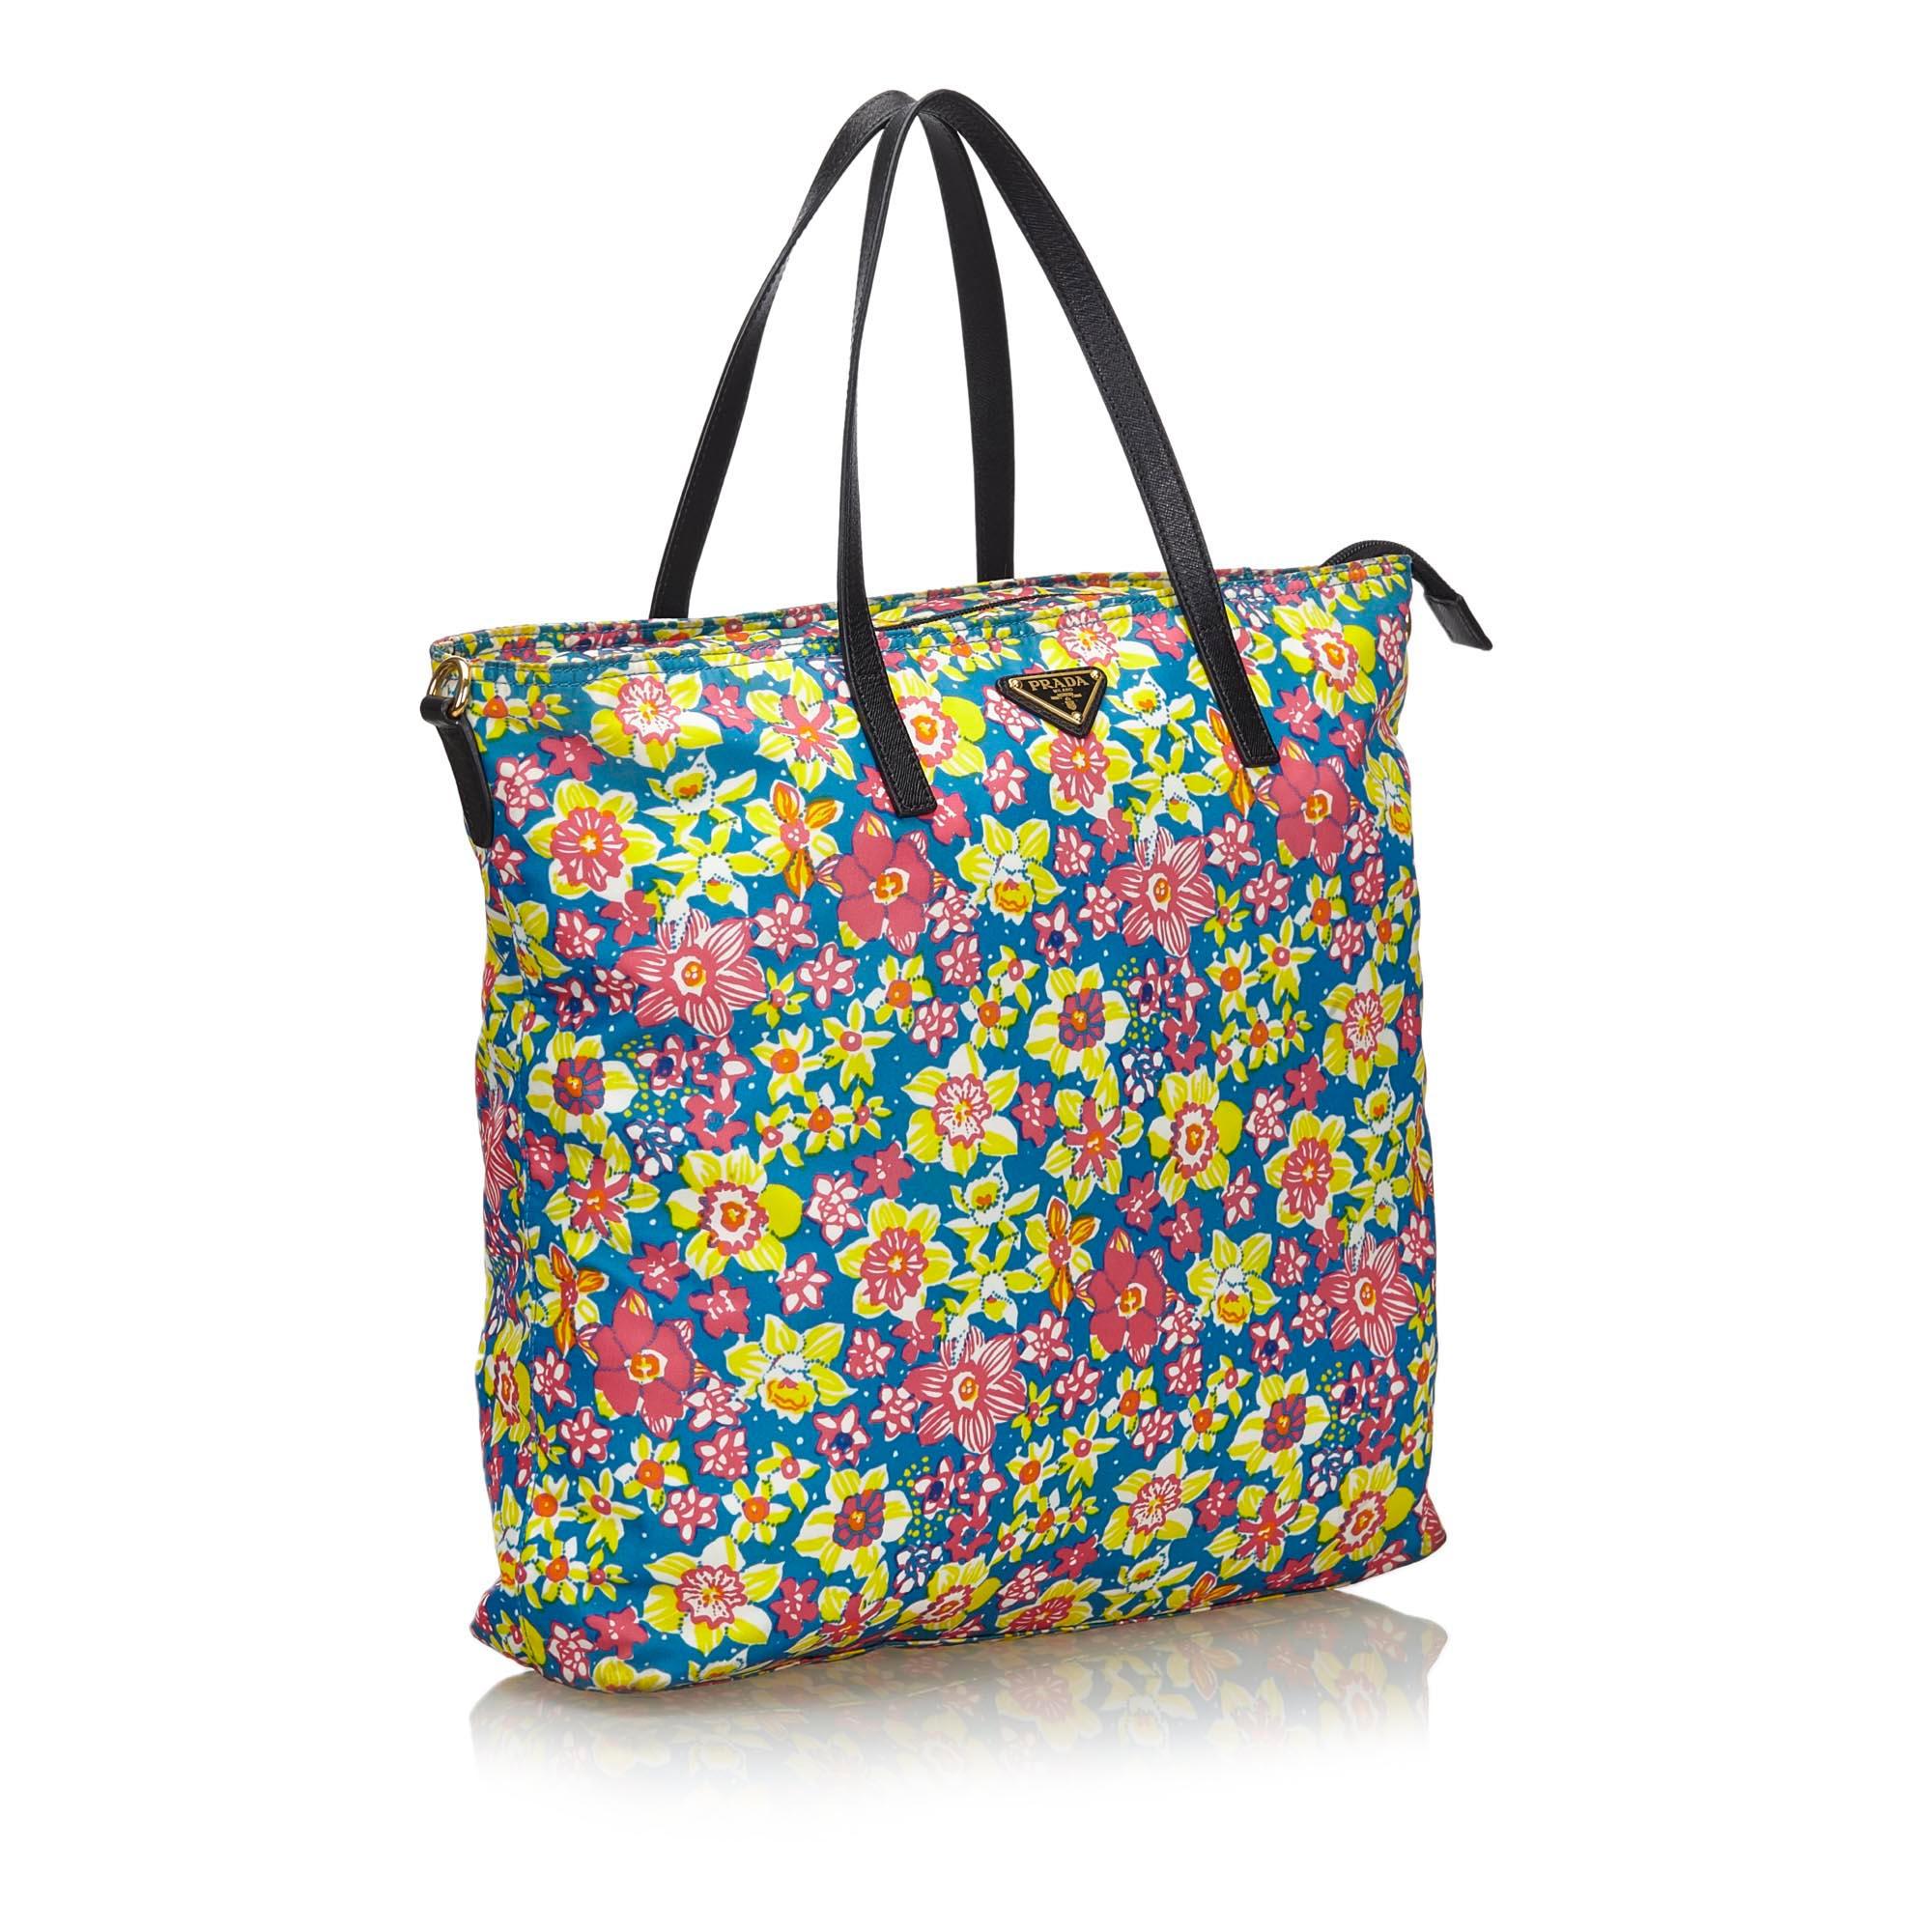 The Tessuto Stampato tote bag features a floral printed nylon body, flat leather straps, an open top, and interior zip pockets It carries as B+ condition rating.

Inclusions: 
This item does not come with inclusions.

Dimensions:
Length: 36.00